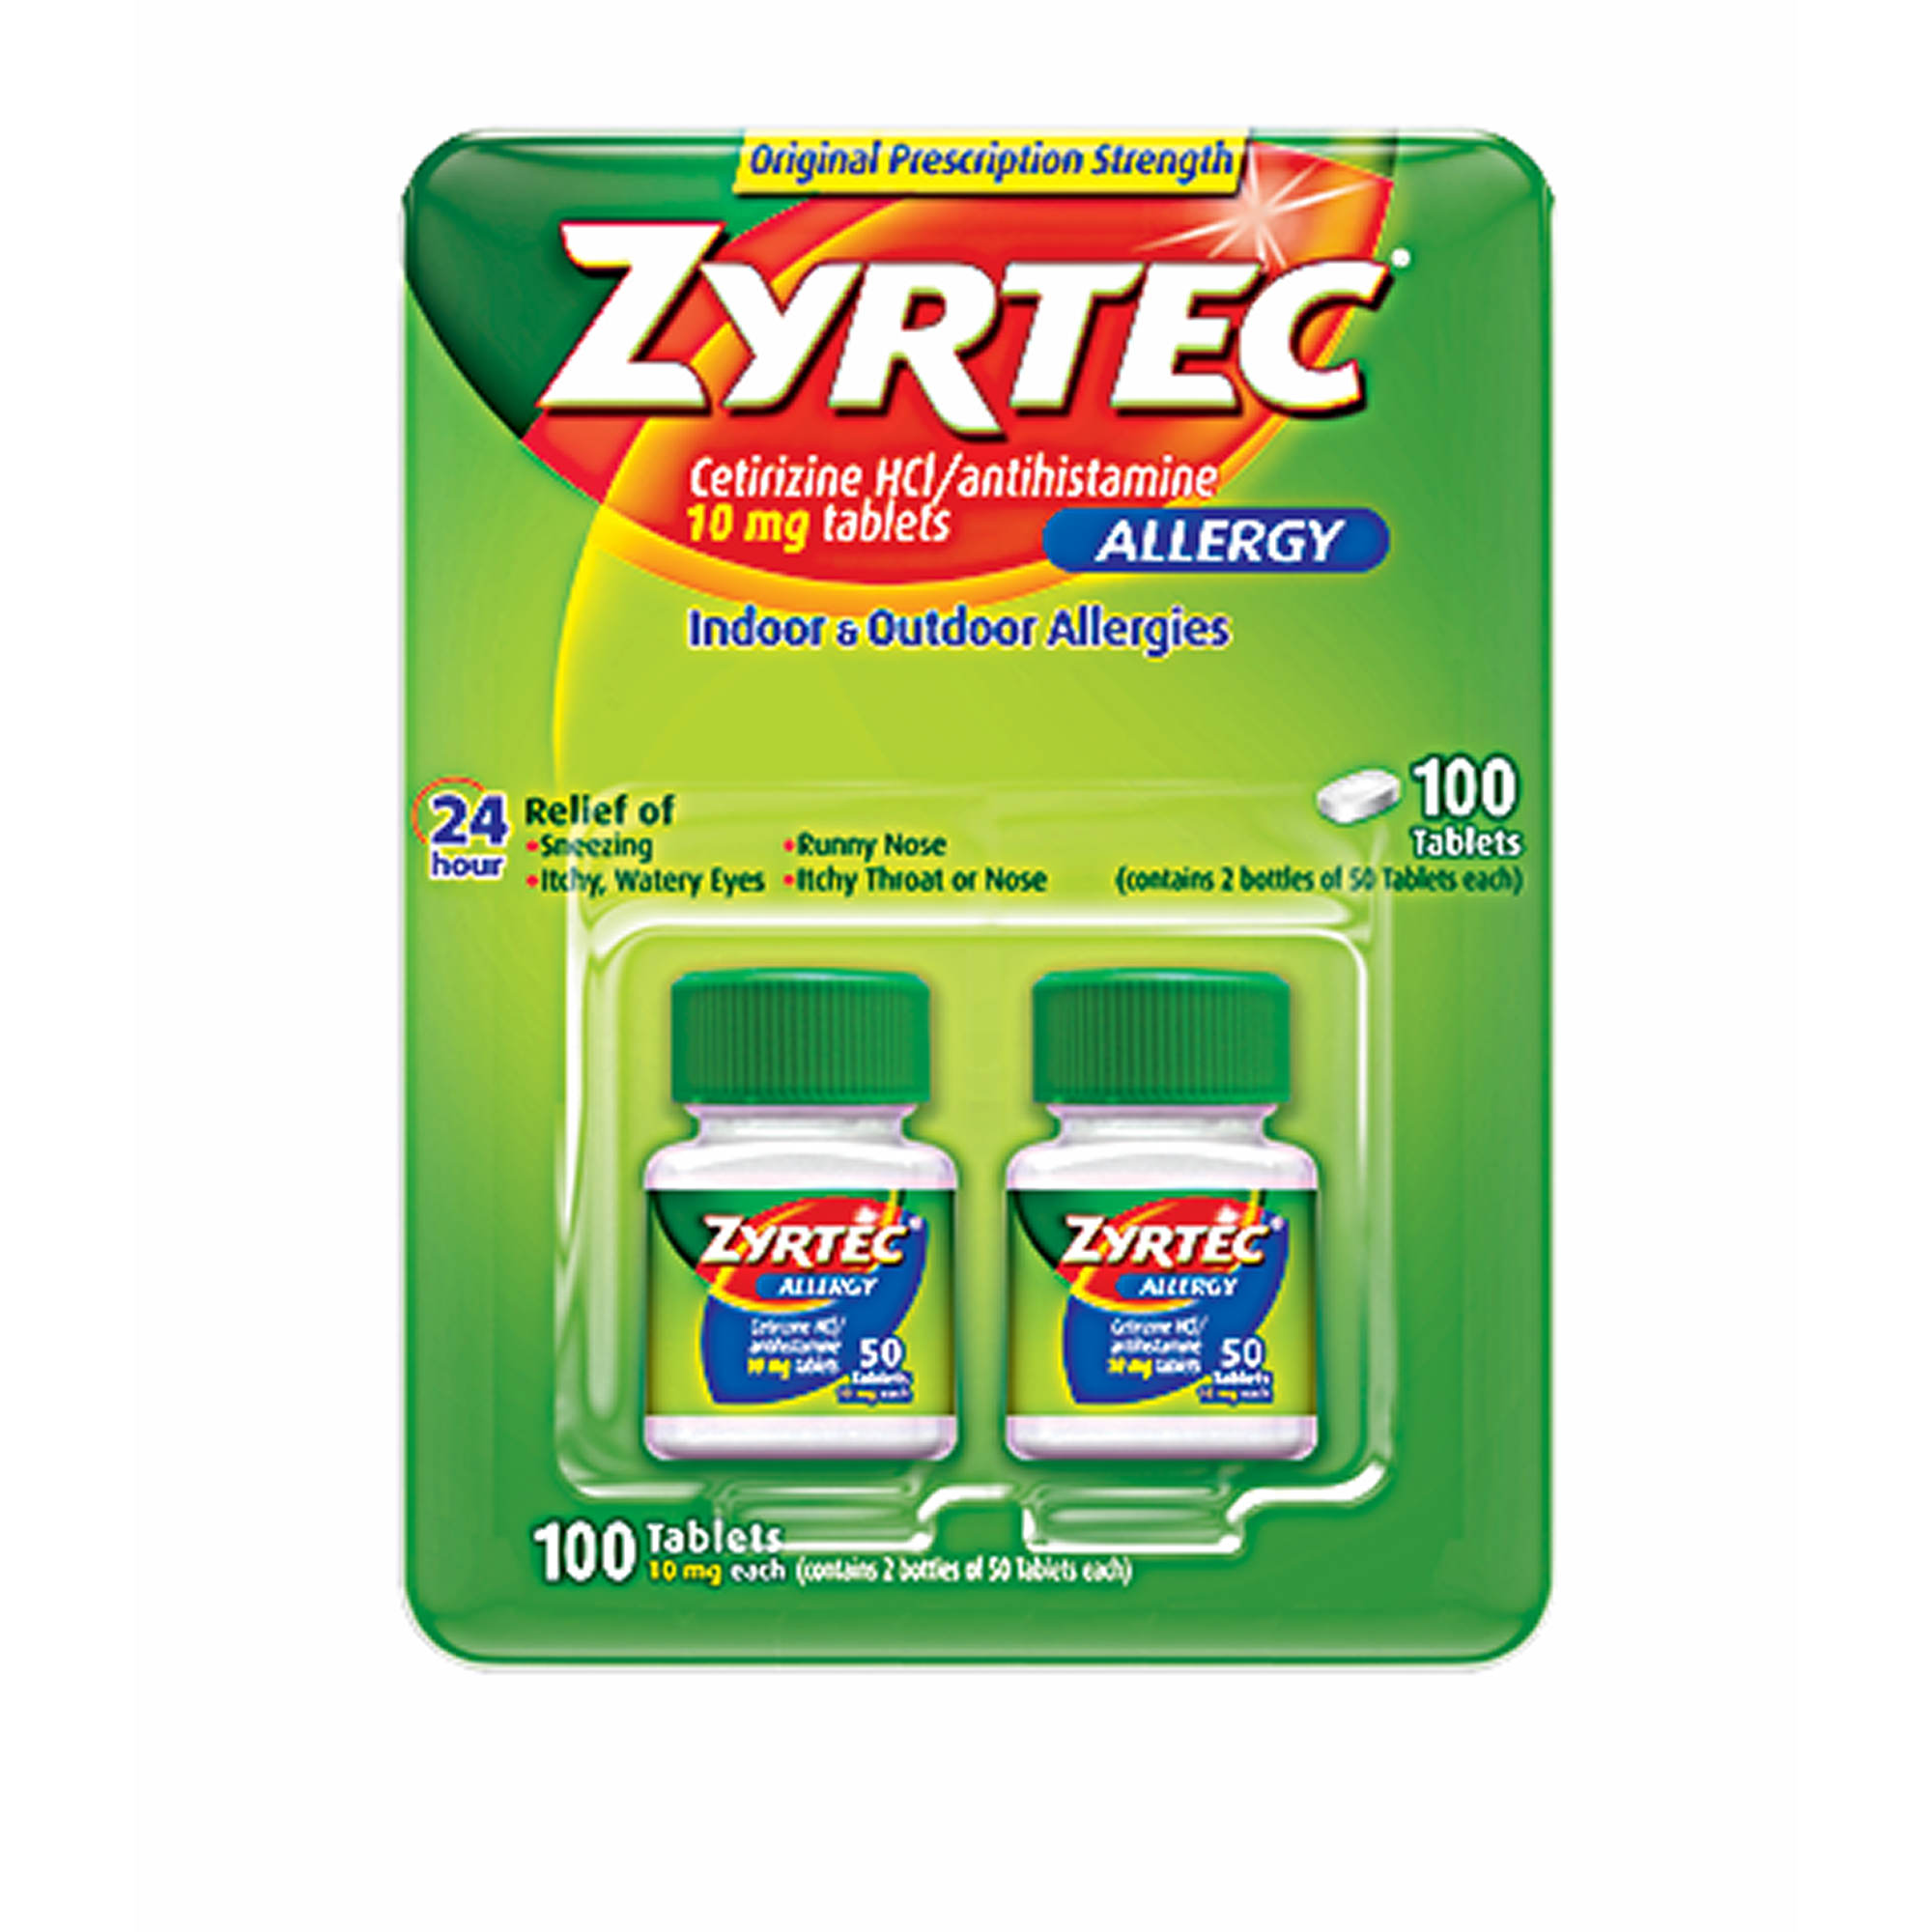 zyrtec 10mg directions